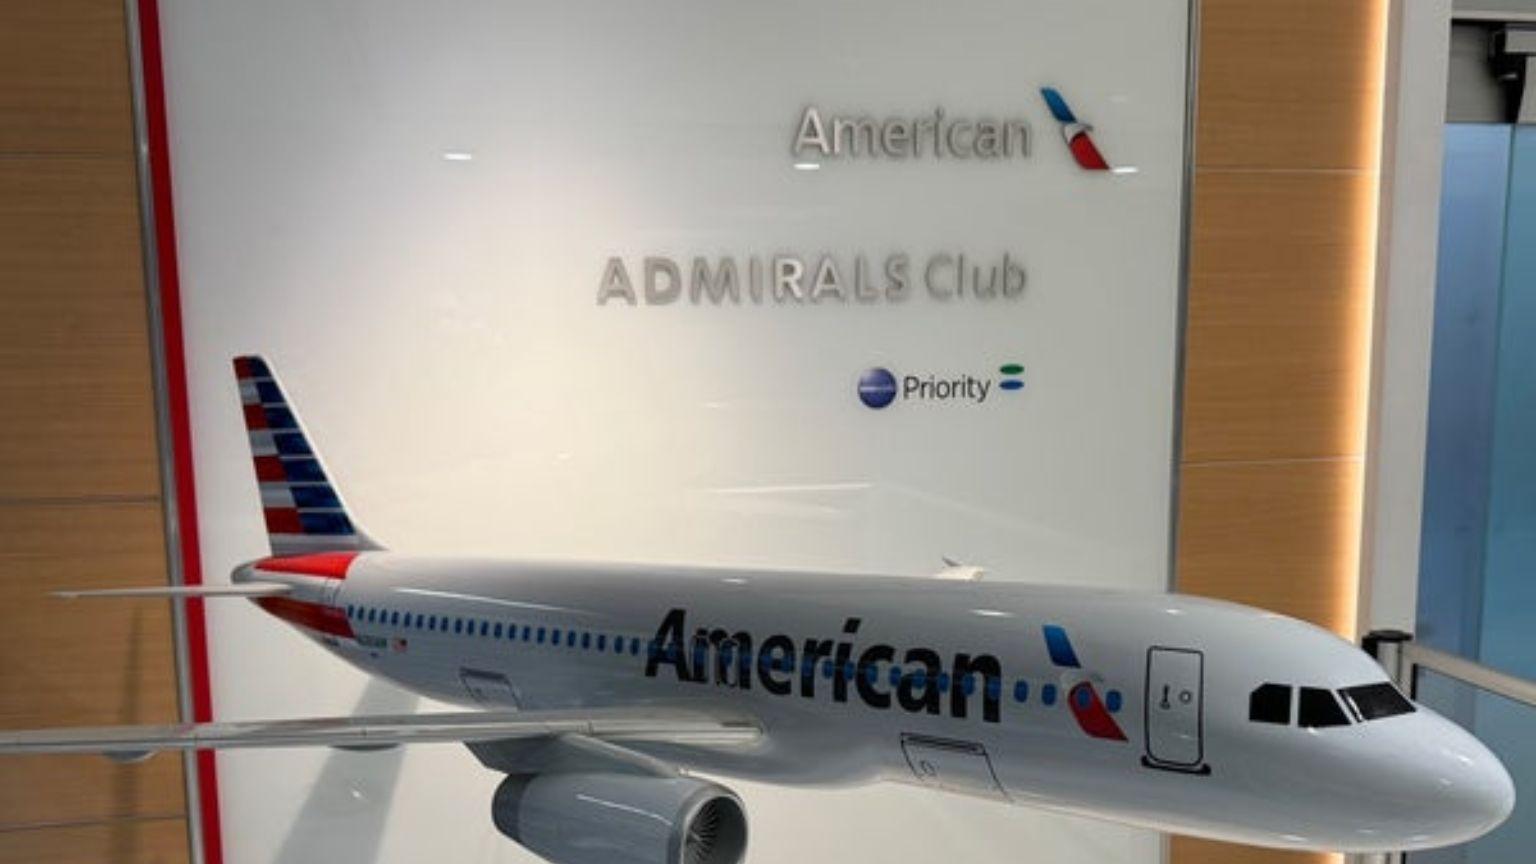 American Airlines Admiral Club Lounge, Terminal 4 – Concourse B